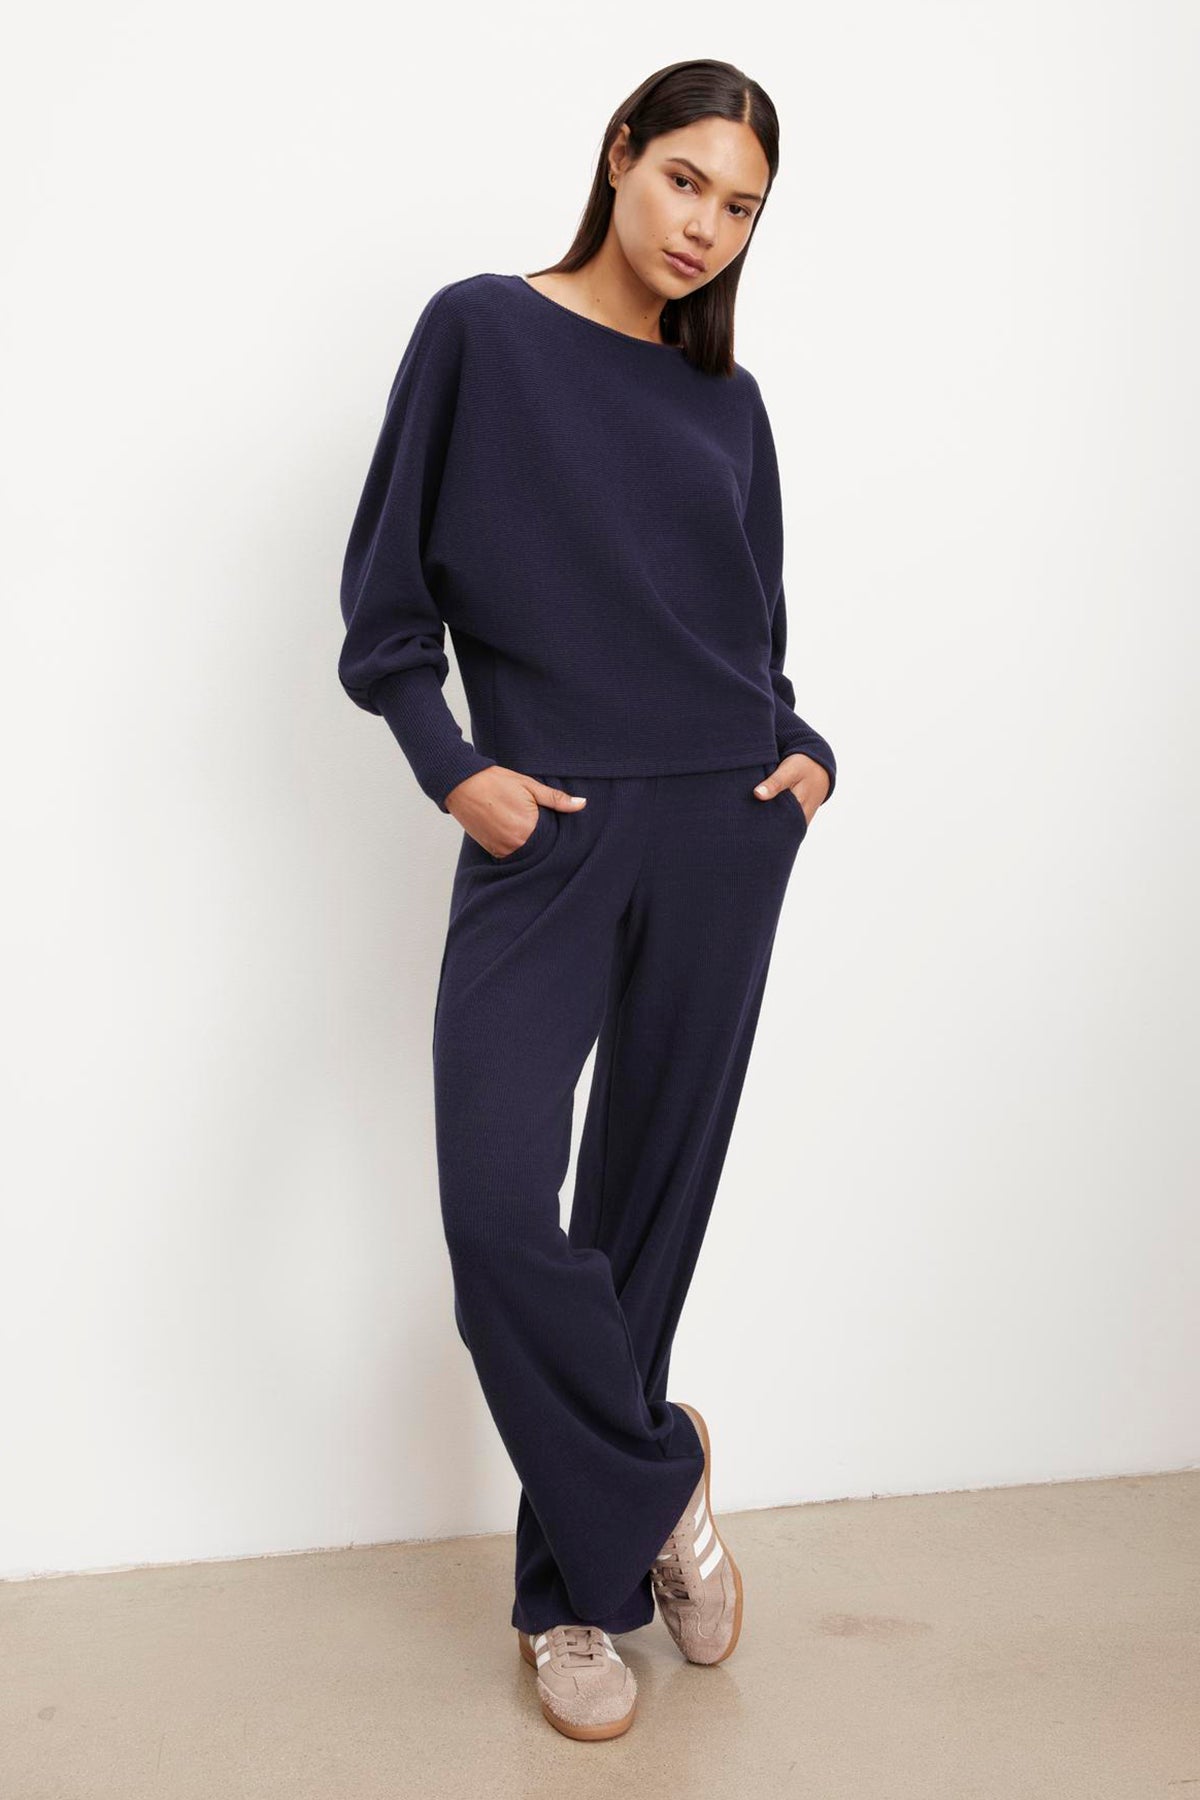 The model is wearing a Velvet by Graham & Spencer KACIE BRUSHED RIB PANT jumpsuit.-35701975417025